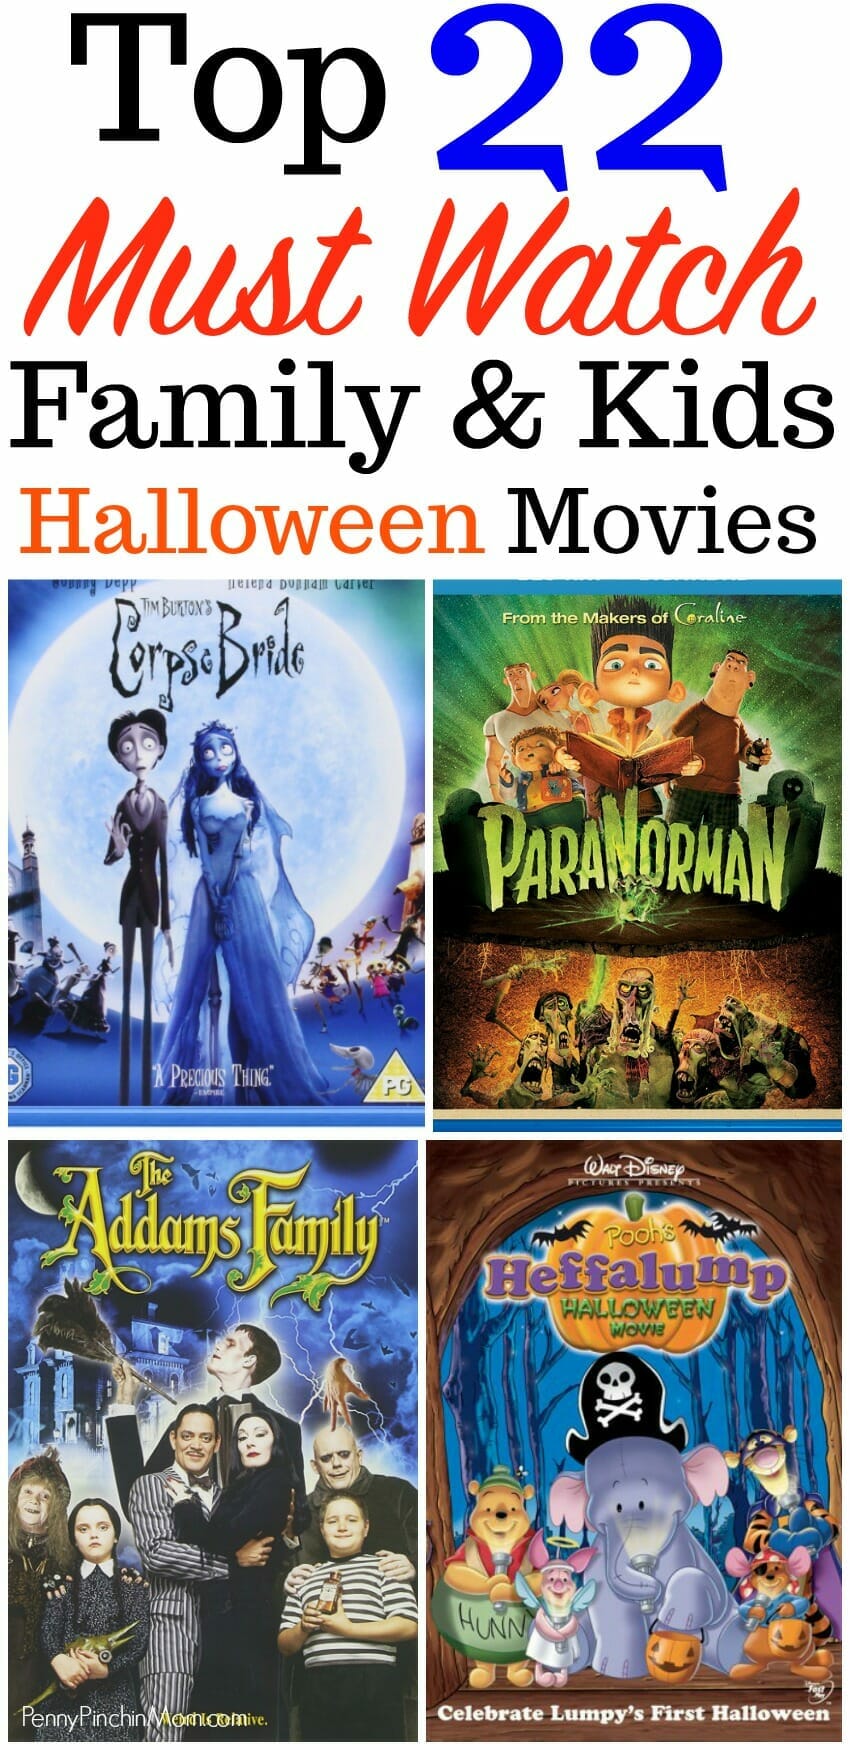 The Best Halloween Movies for Kids and Families To Watch